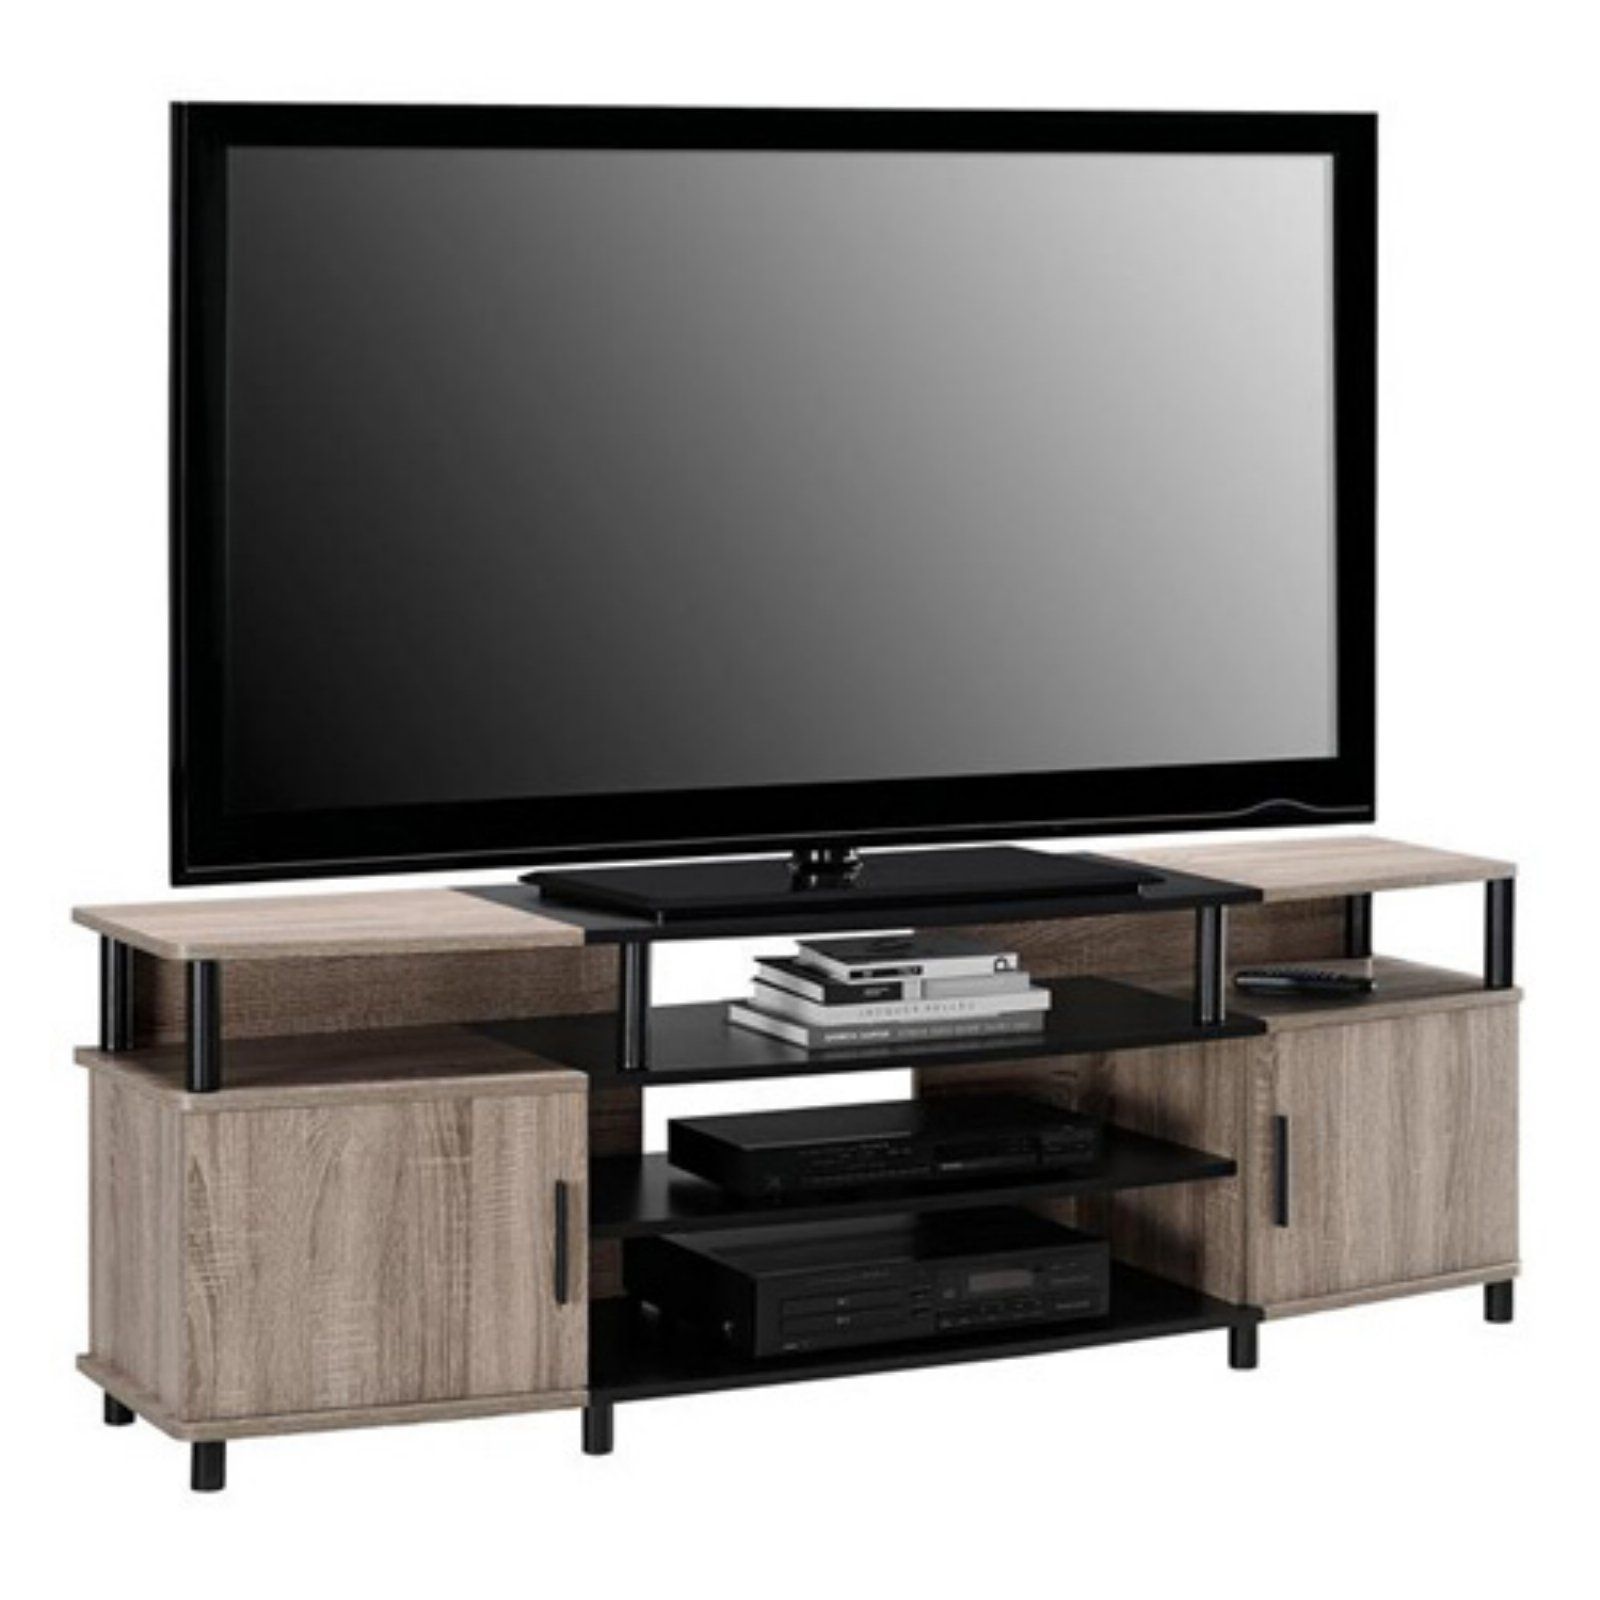 Ameriwood Home Carson Tv Stand For Tvs Up To 70", Multiple Pertaining To Mainstays Tv Stands For Tvs With Multiple Colors (View 6 of 15)